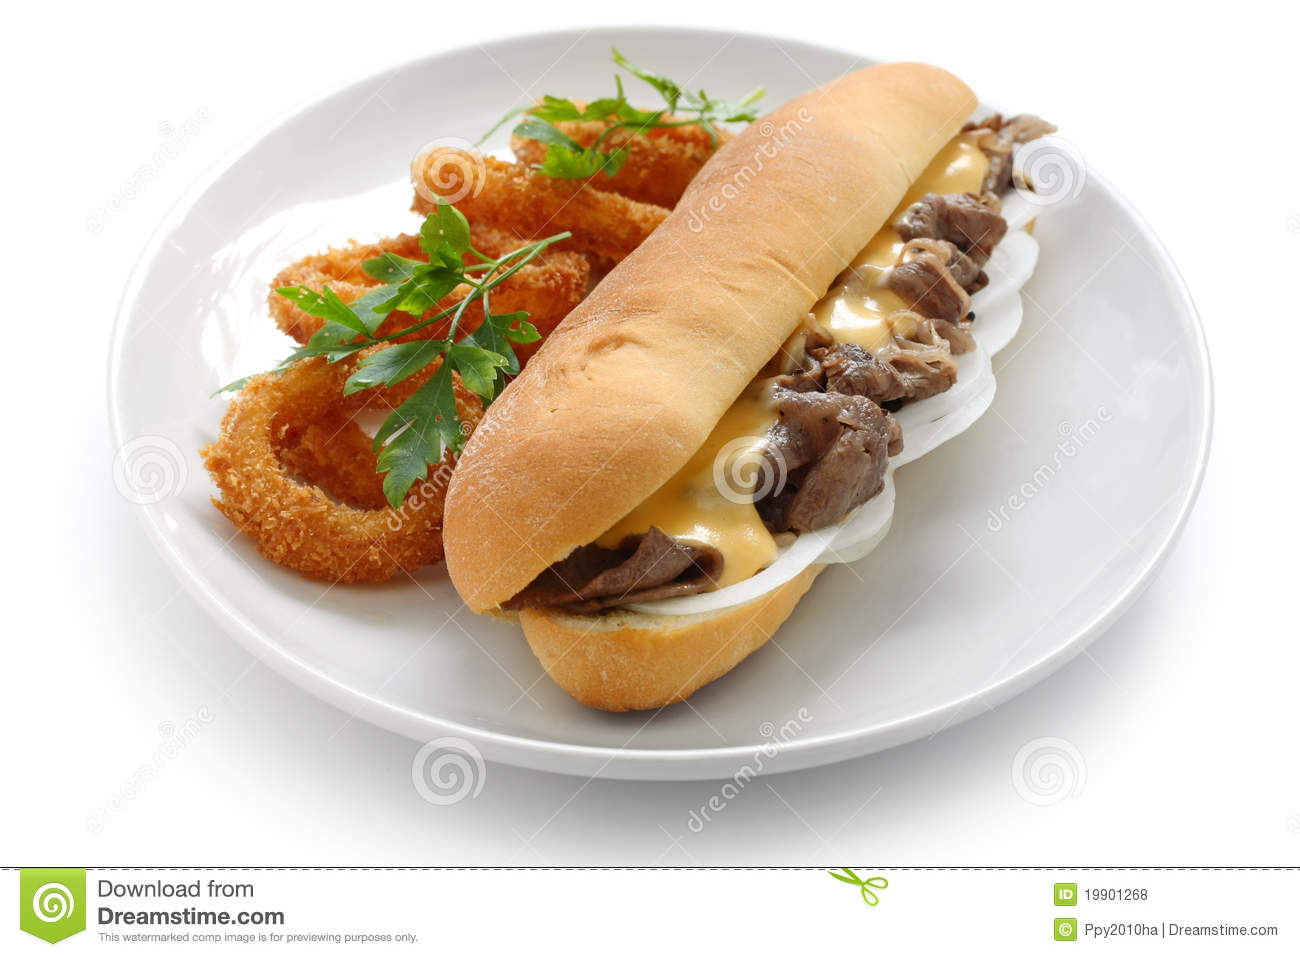 Philly Cheese Steak Sandwich Royalty Free Stock Photos   Image